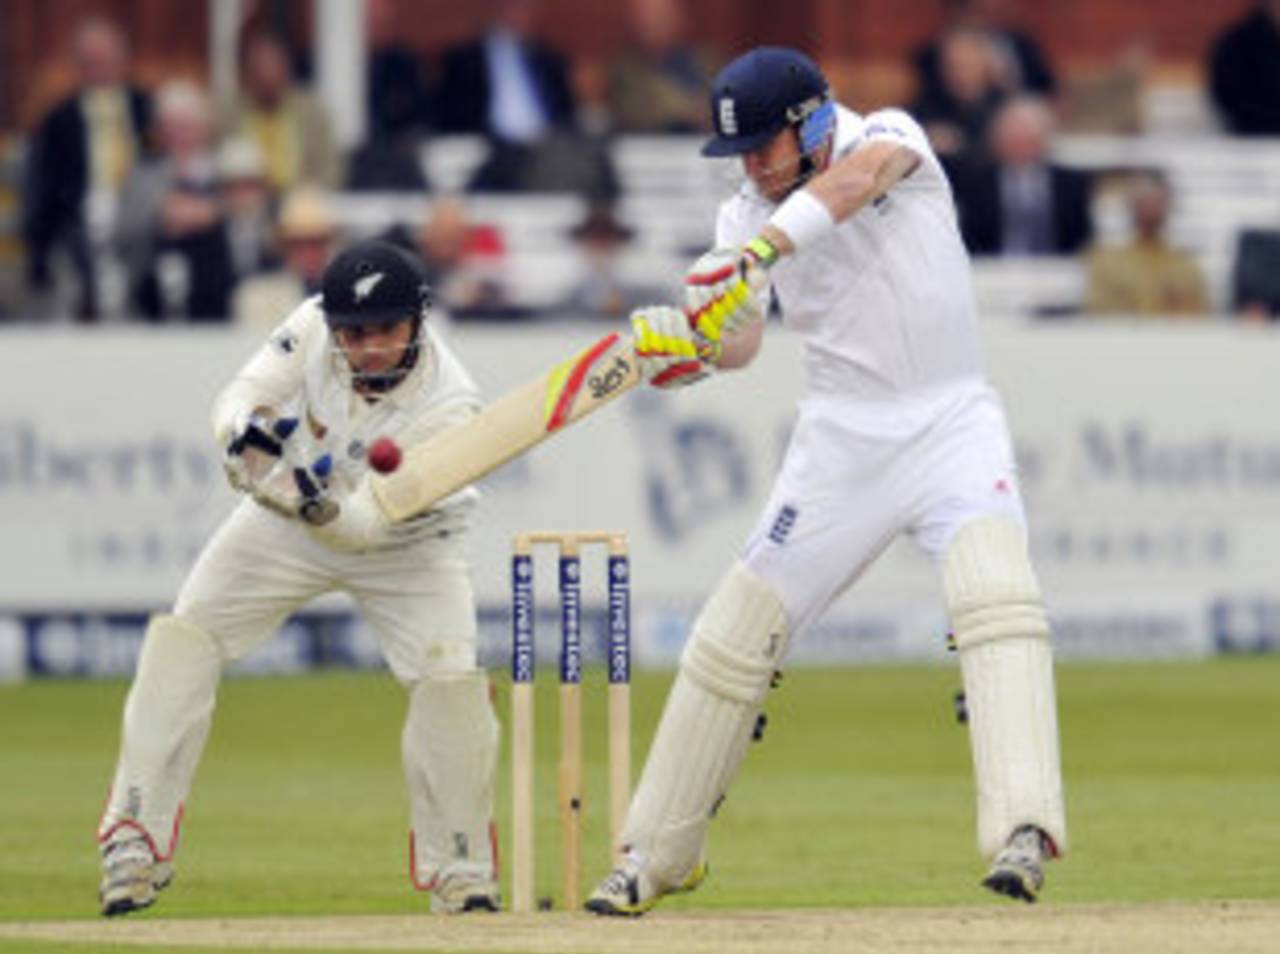 Ian Bell throws circumspection to the winds for one glorious ball during his 133-ball 31&nbsp;&nbsp;&bull;&nbsp;&nbsp;Getty Images